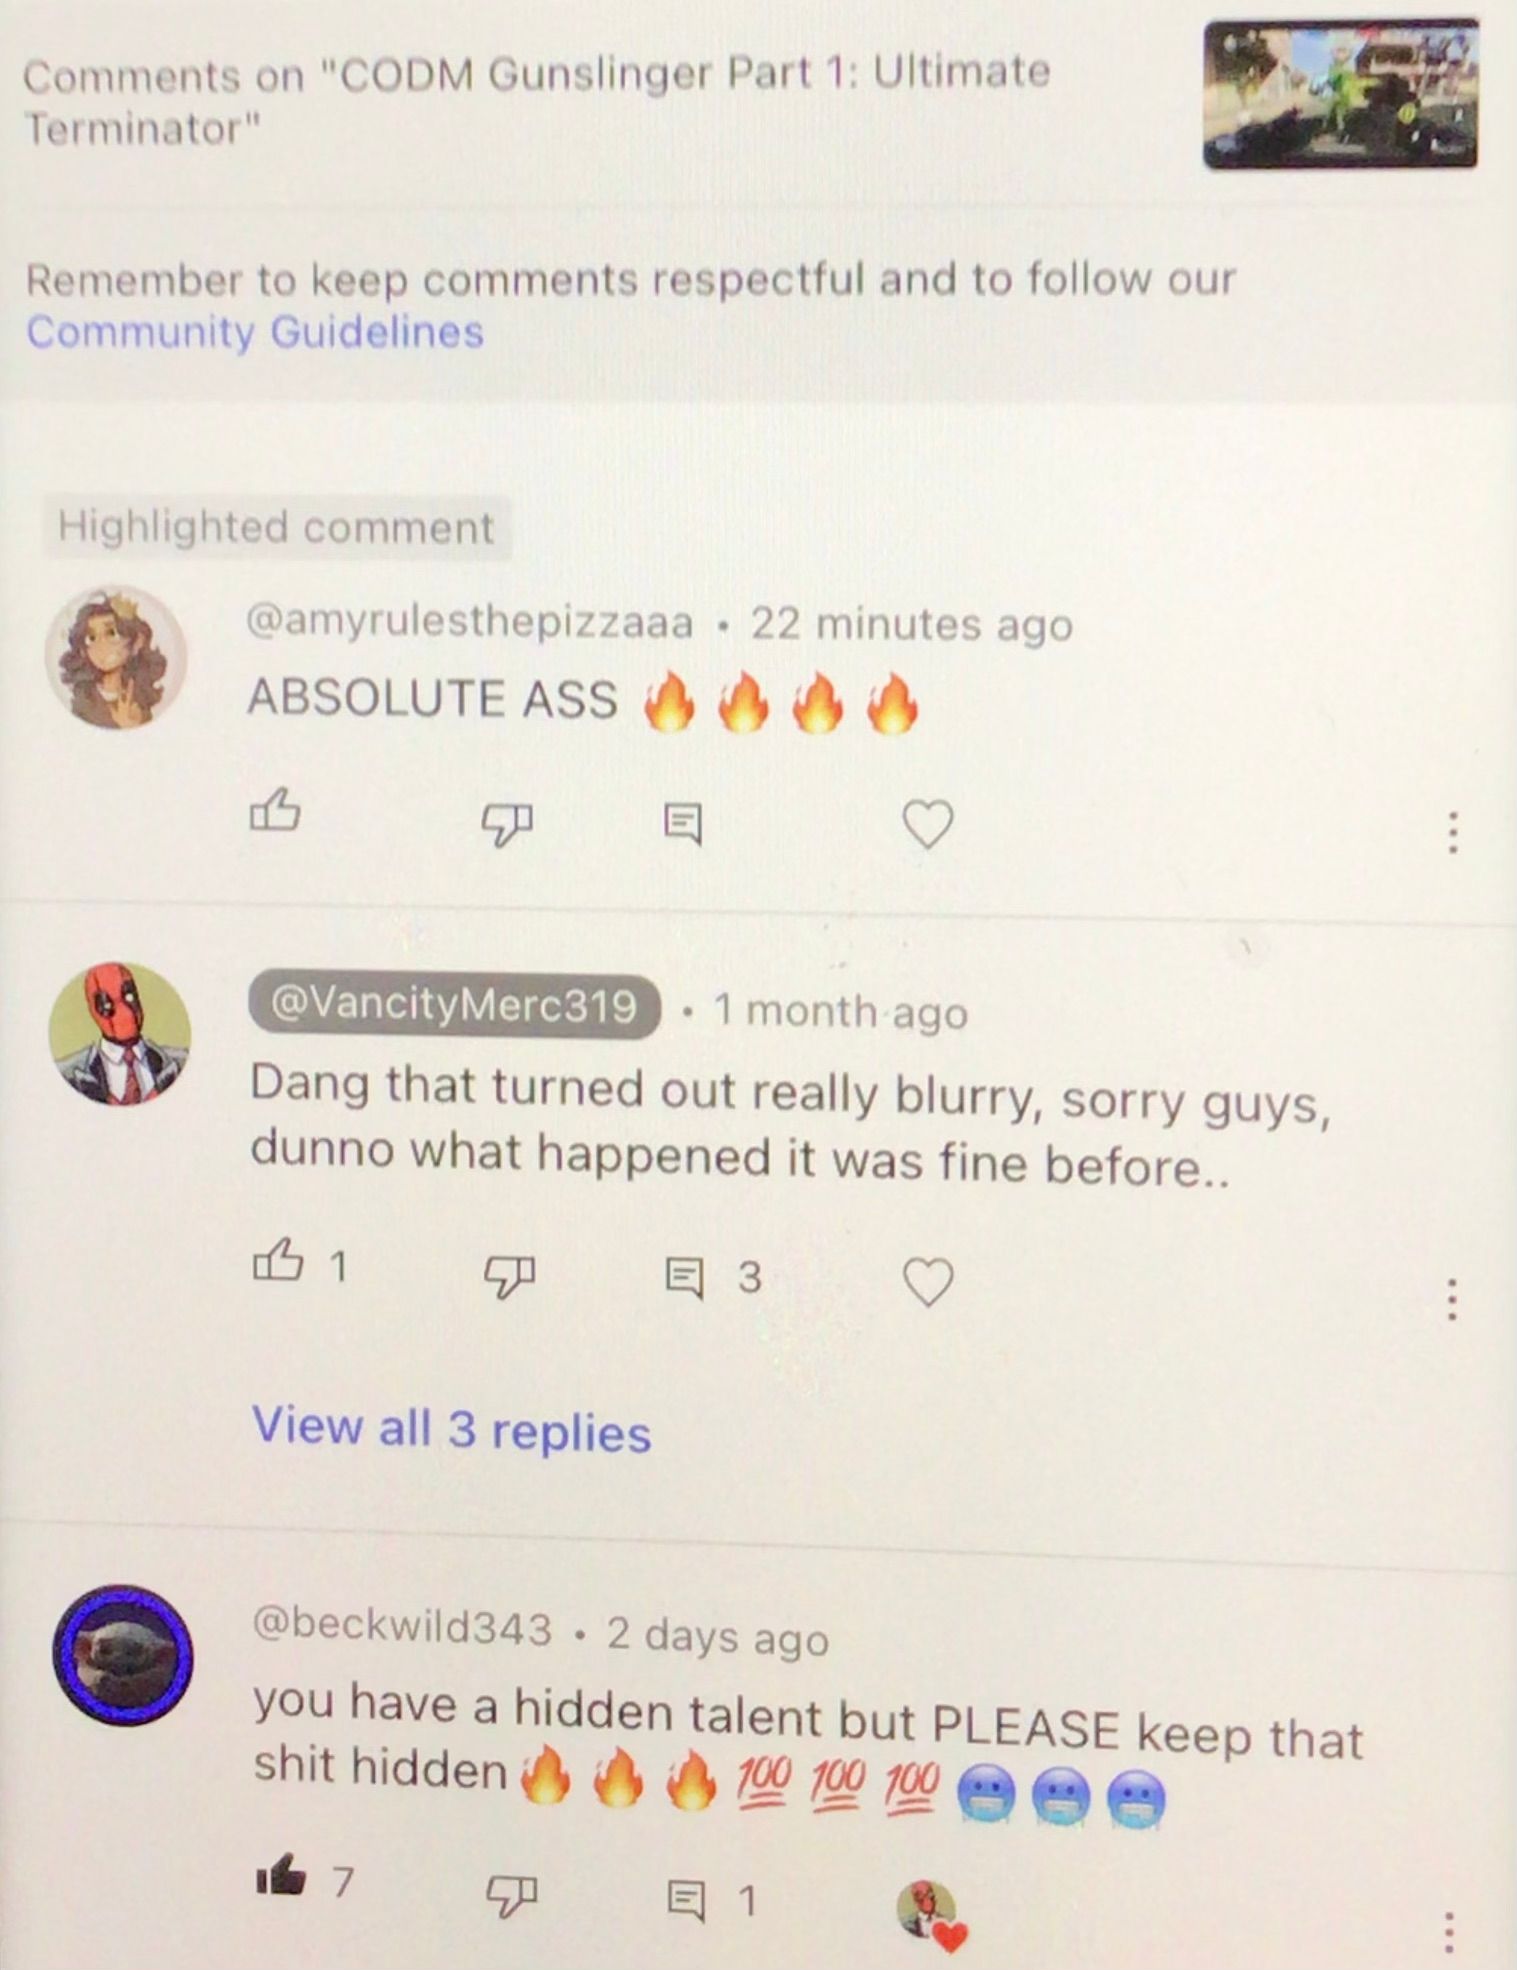 Comments on "CODM Gunslinger Part 1: Ultimate
Terminator"
Remember to keep comments respectful and to follow our
Community Guidelines
Highlighted comment
@amyrulesthepizzaaa 22 minutes ago
ABSOLUTE ASS 0000
1
ܡ
@VancityMerc319
. 1 month ago
Dang that turned out really blurry, sorry guys,
dunno what happened it was fine before..
P
View all 3 replies
7
.
E3
@beckwild343 • 2 days ago
you have a hidden talent but PLEASE keep that
shit hidden
100 100 100
目 1